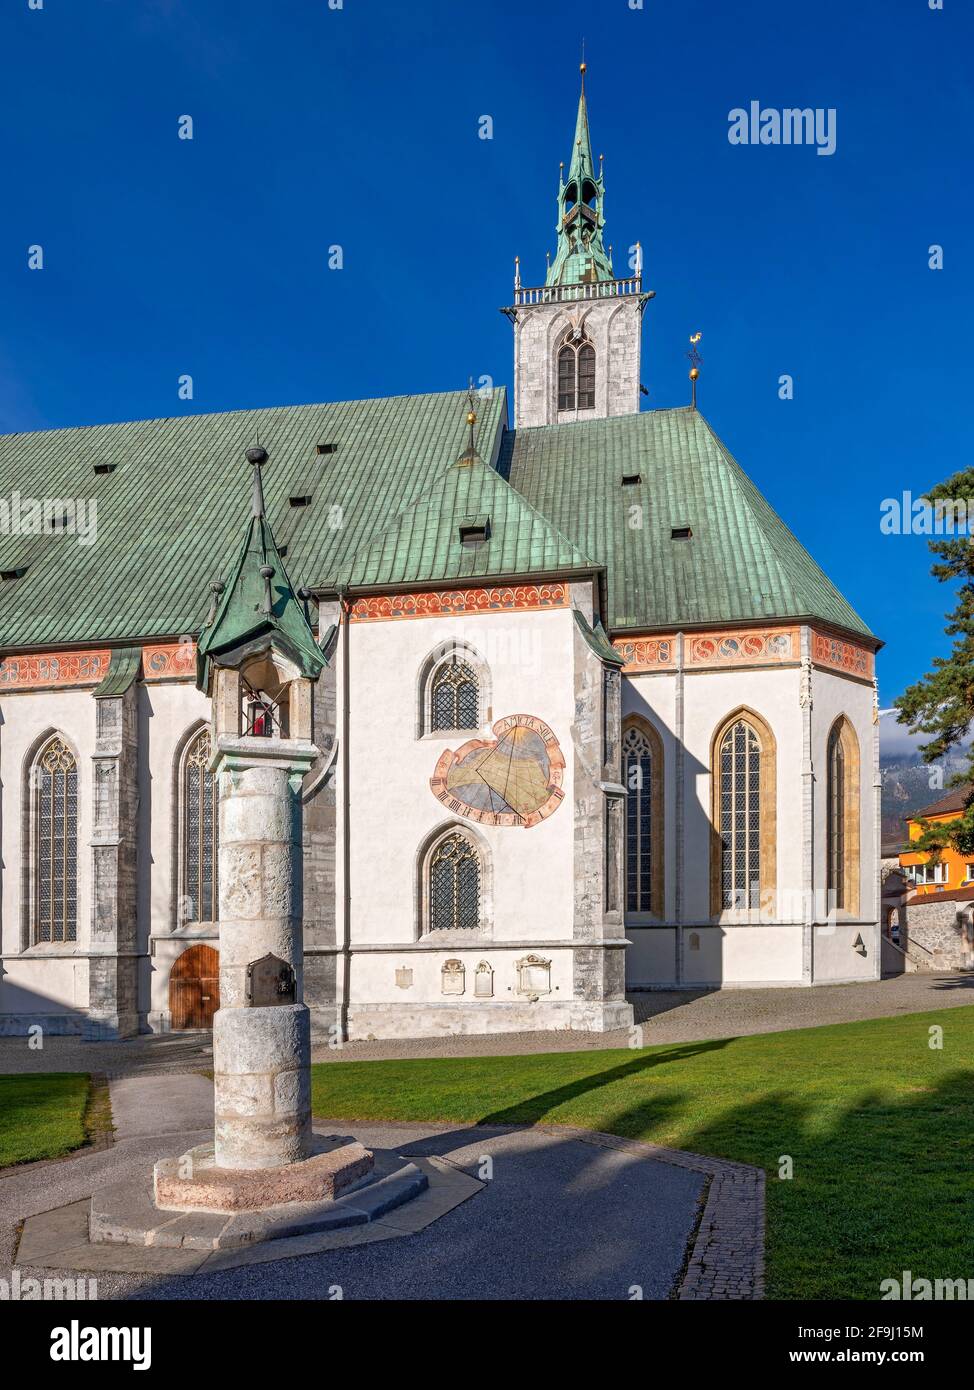 The parish church of Maria Himmelfahrt is the largest and most important Gothic sacral building in Tyrol, Austria Stock Photo